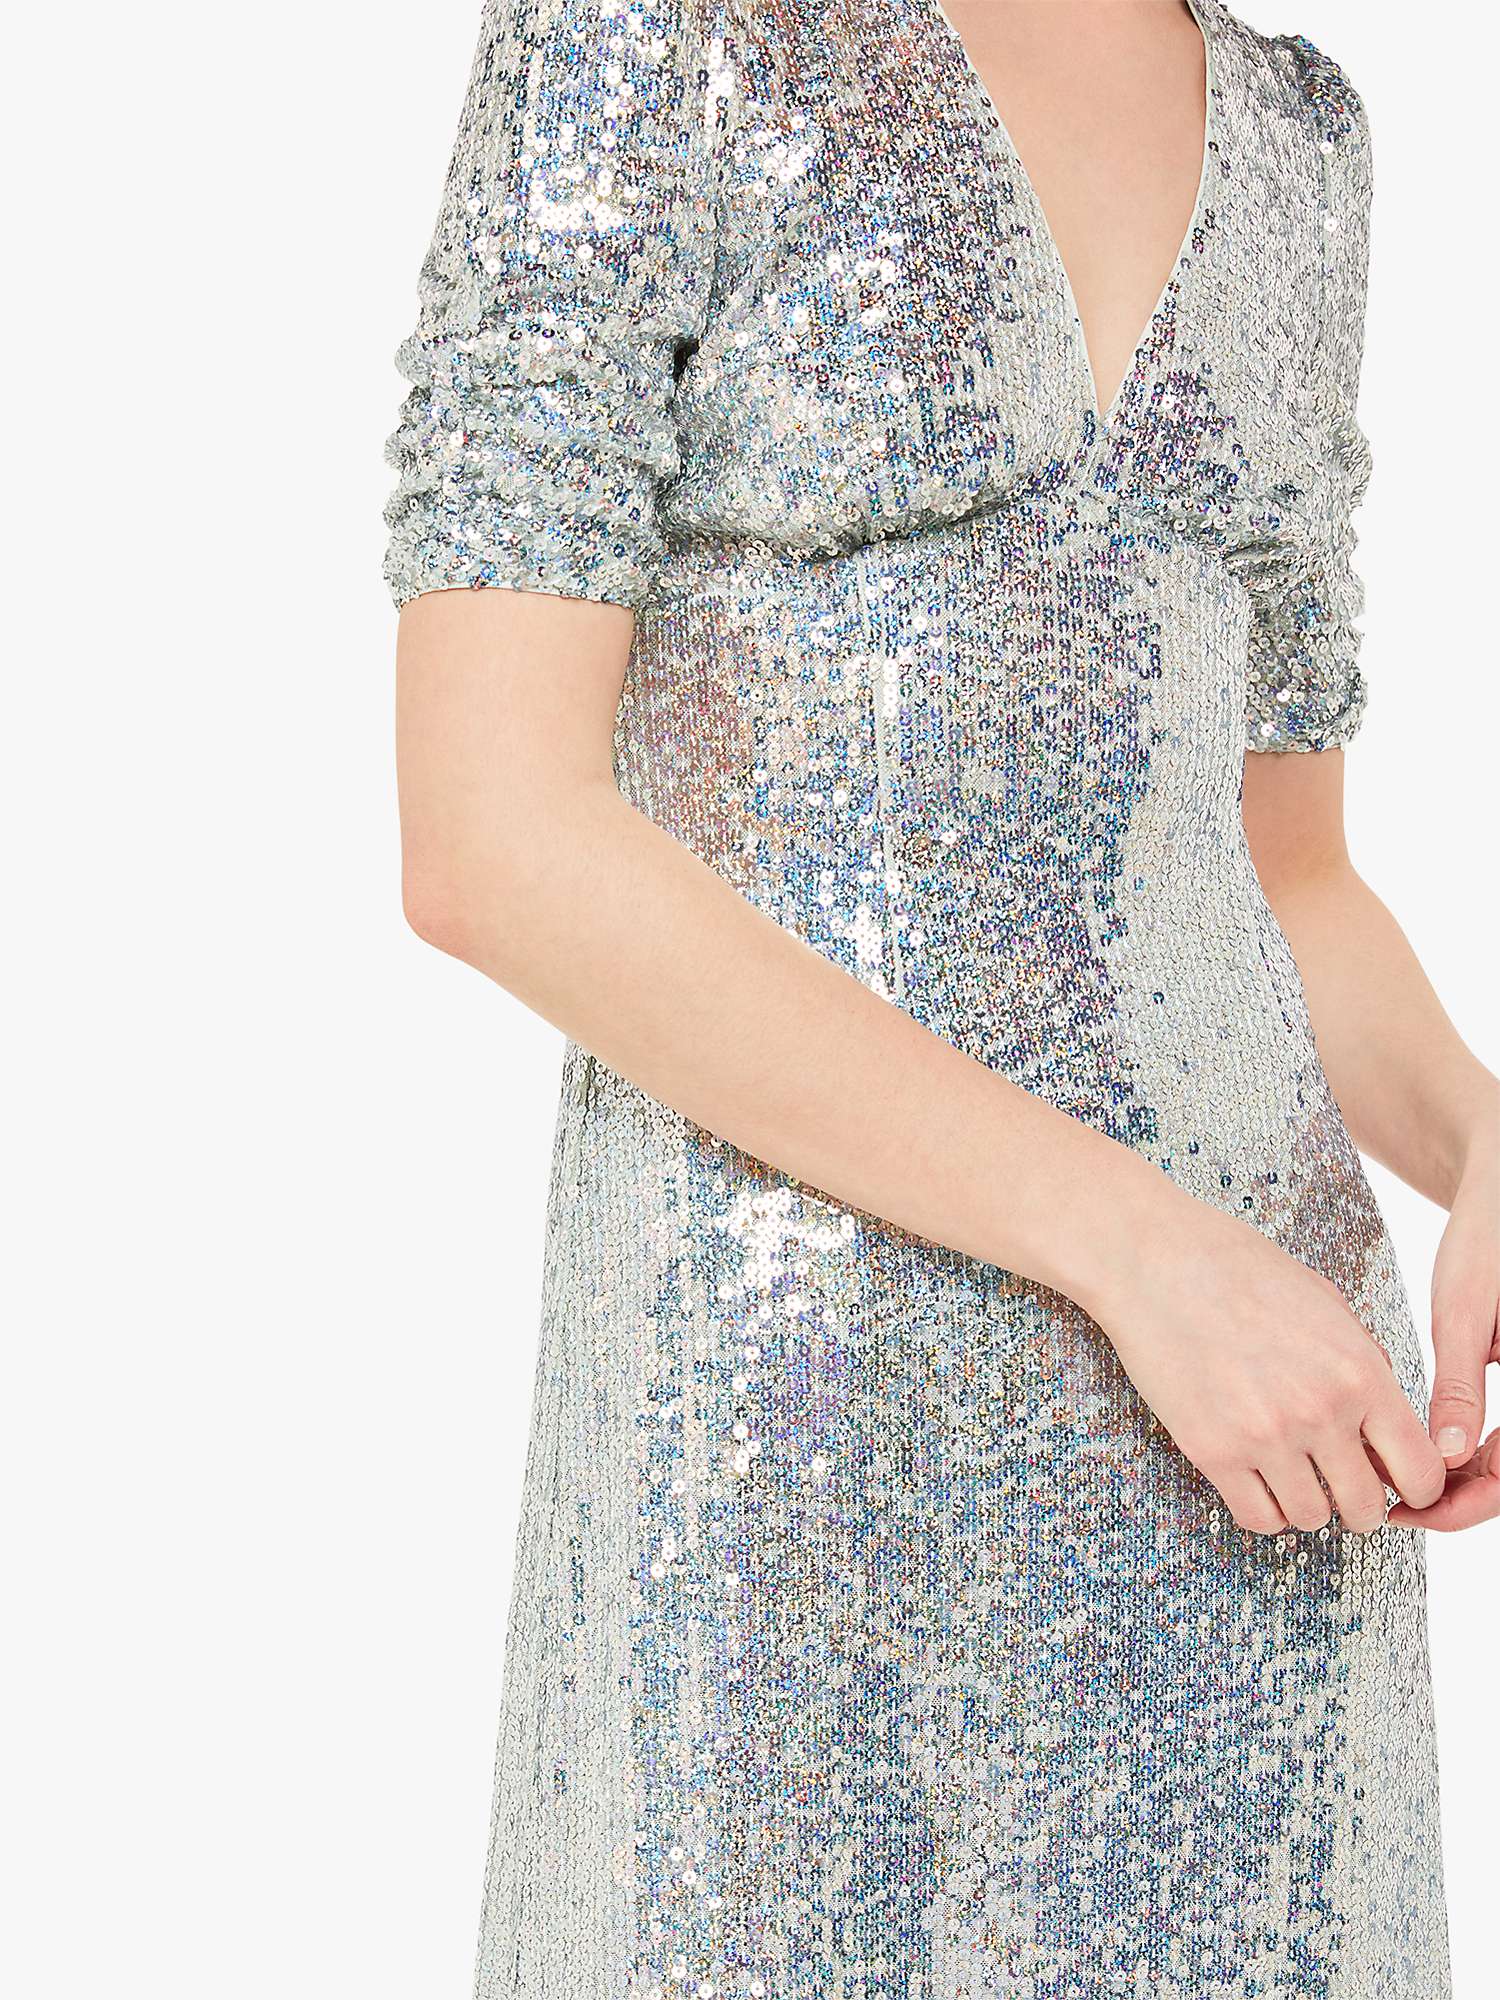 Buy Whistles Sequin Midi Dress, Silver Online at johnlewis.com